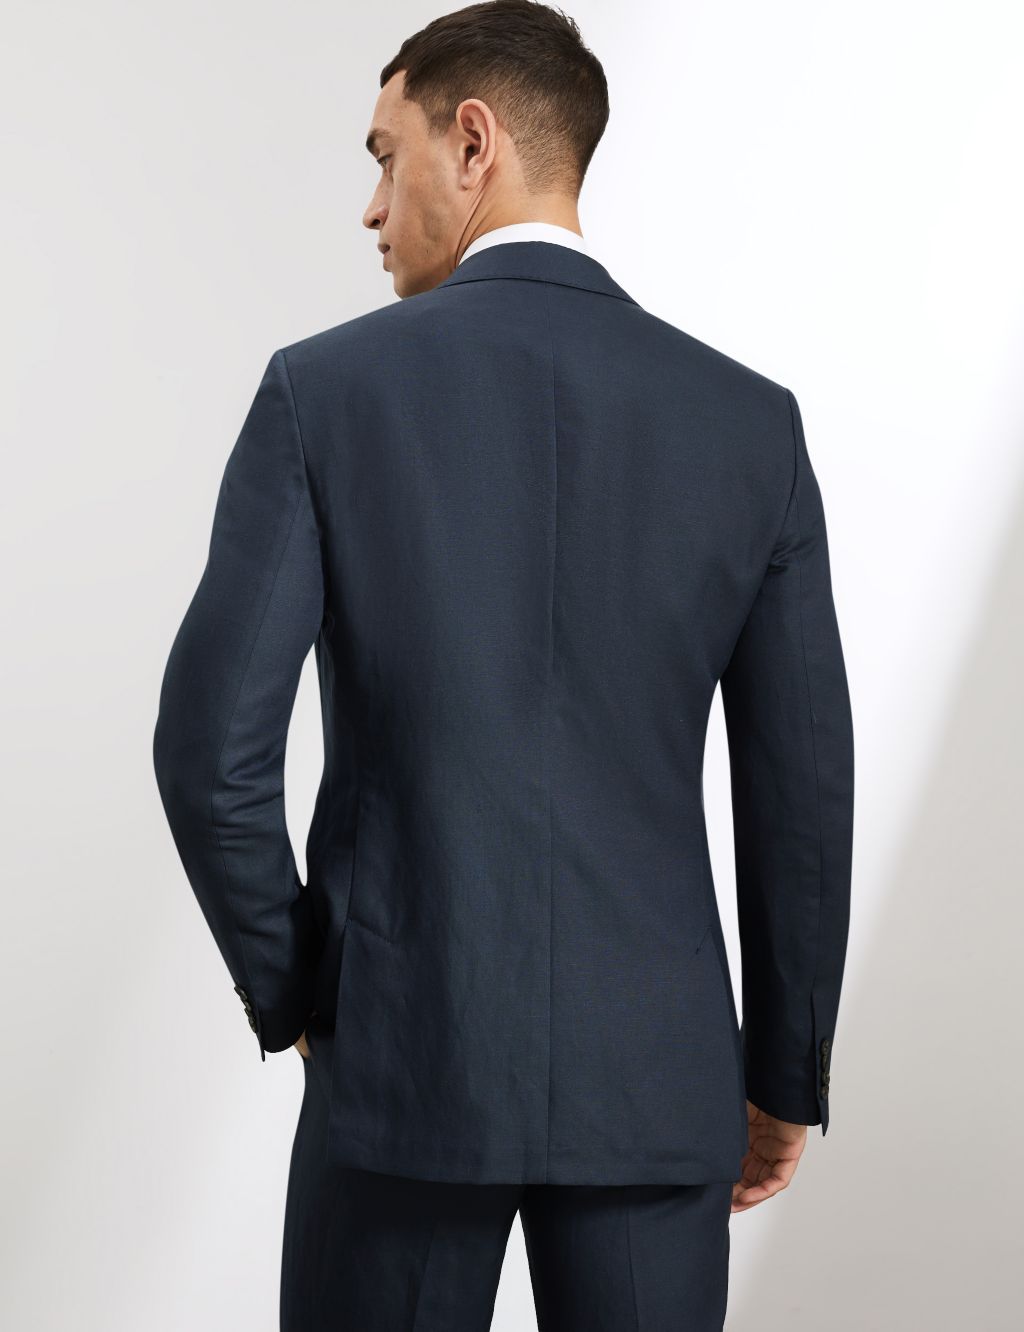 Tailored Fit Italian Silk And Linen Jacket image 4